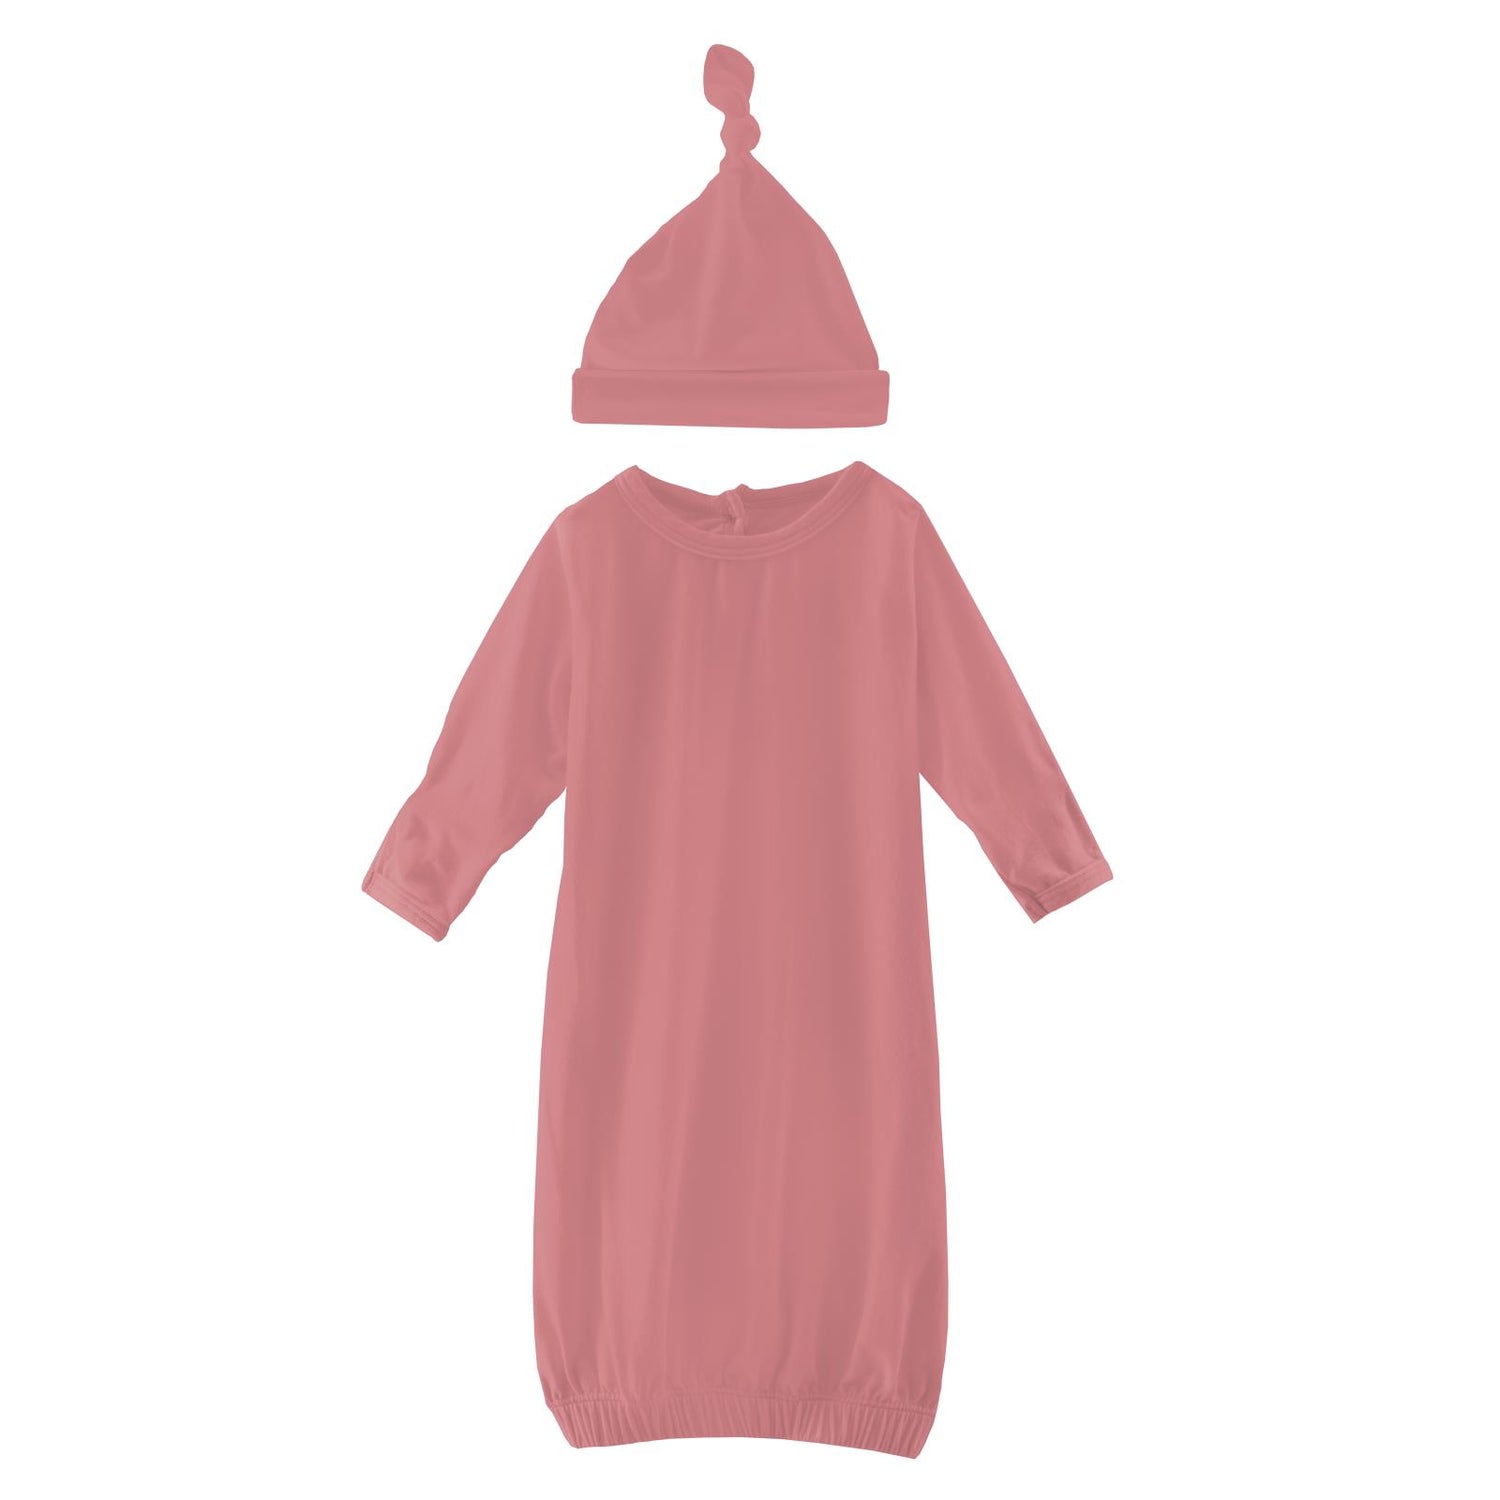 Layette Gown & Single Knot Hat Set in Desert Rose